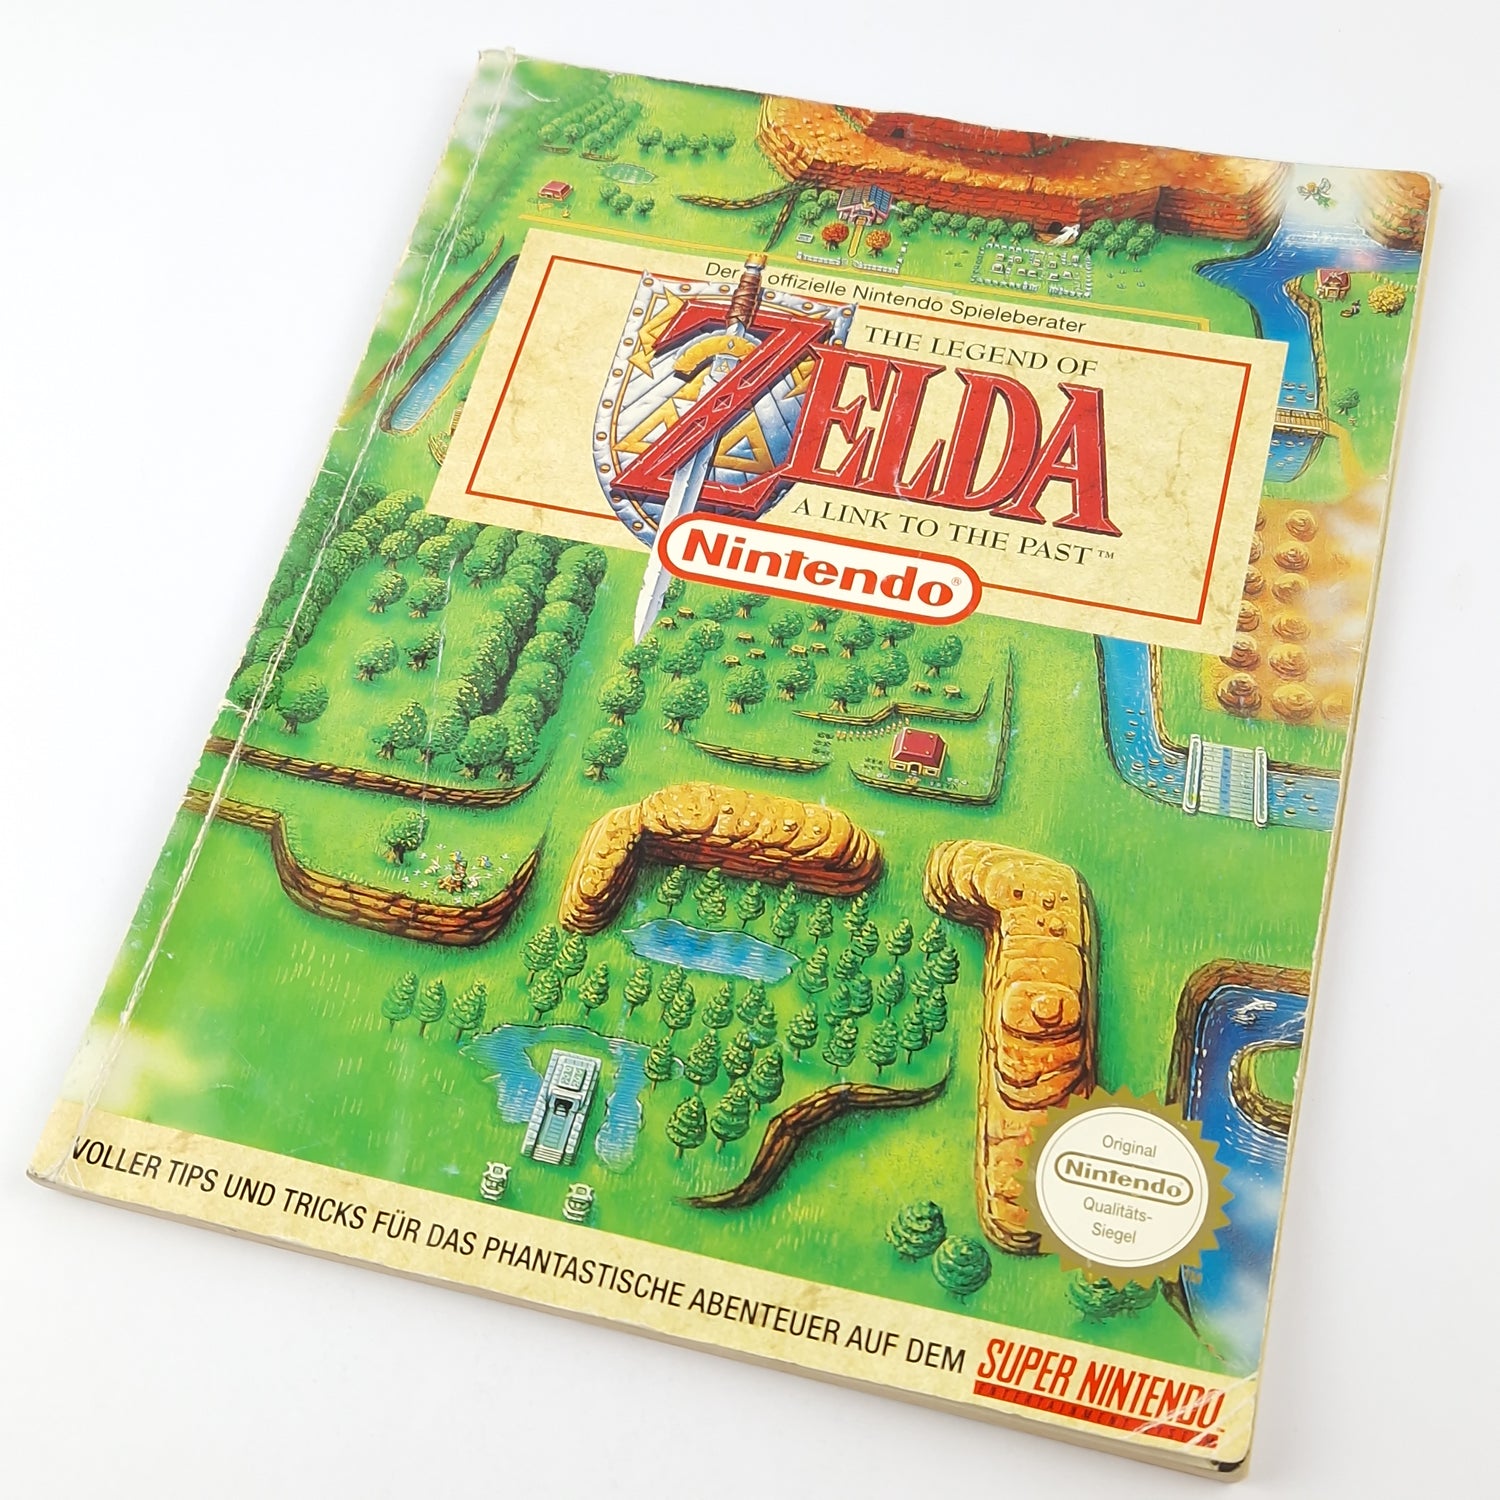 Super Nintendo Spieleberater : Zelda a link to the Past - SNES Lösungsbuch Guide